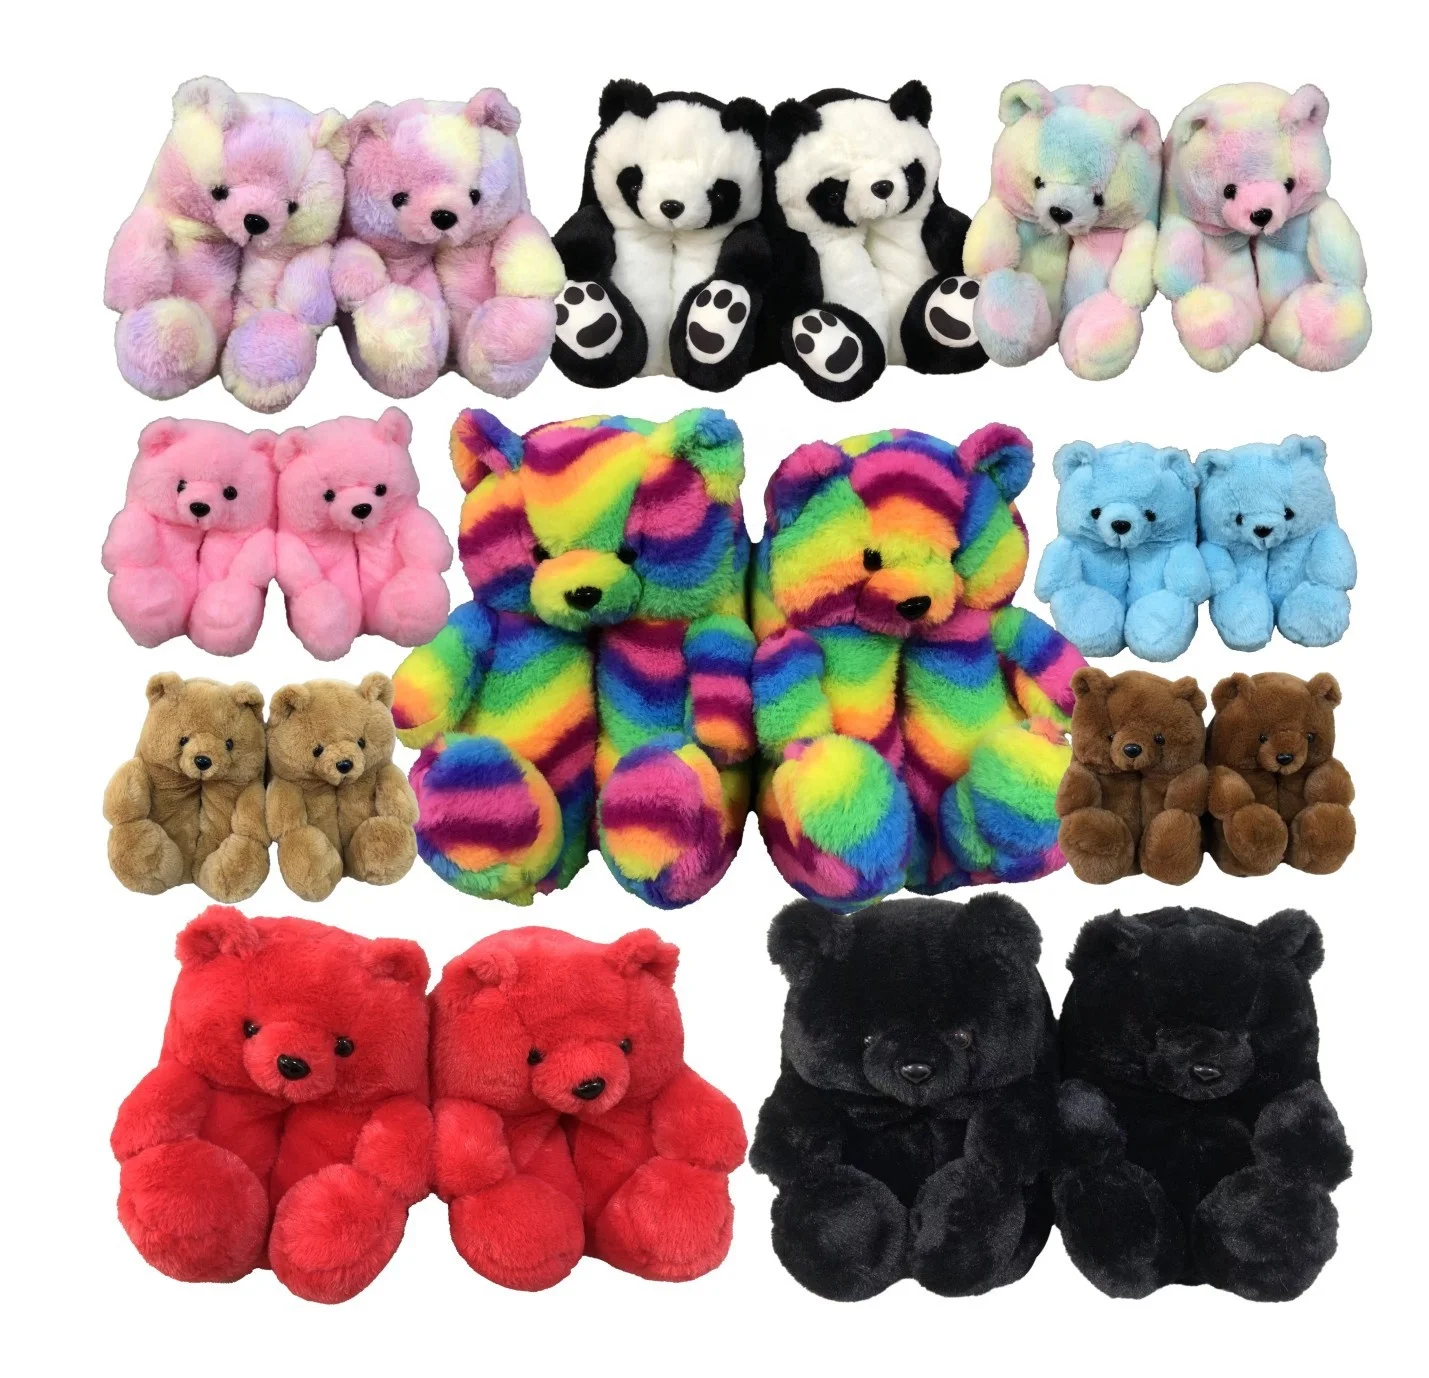 

Women Blue Teddy Bear Slippers  2021 Lovely winter sleepers shoes For Girls New Arrivals Furry Bear Slippers, Customized color